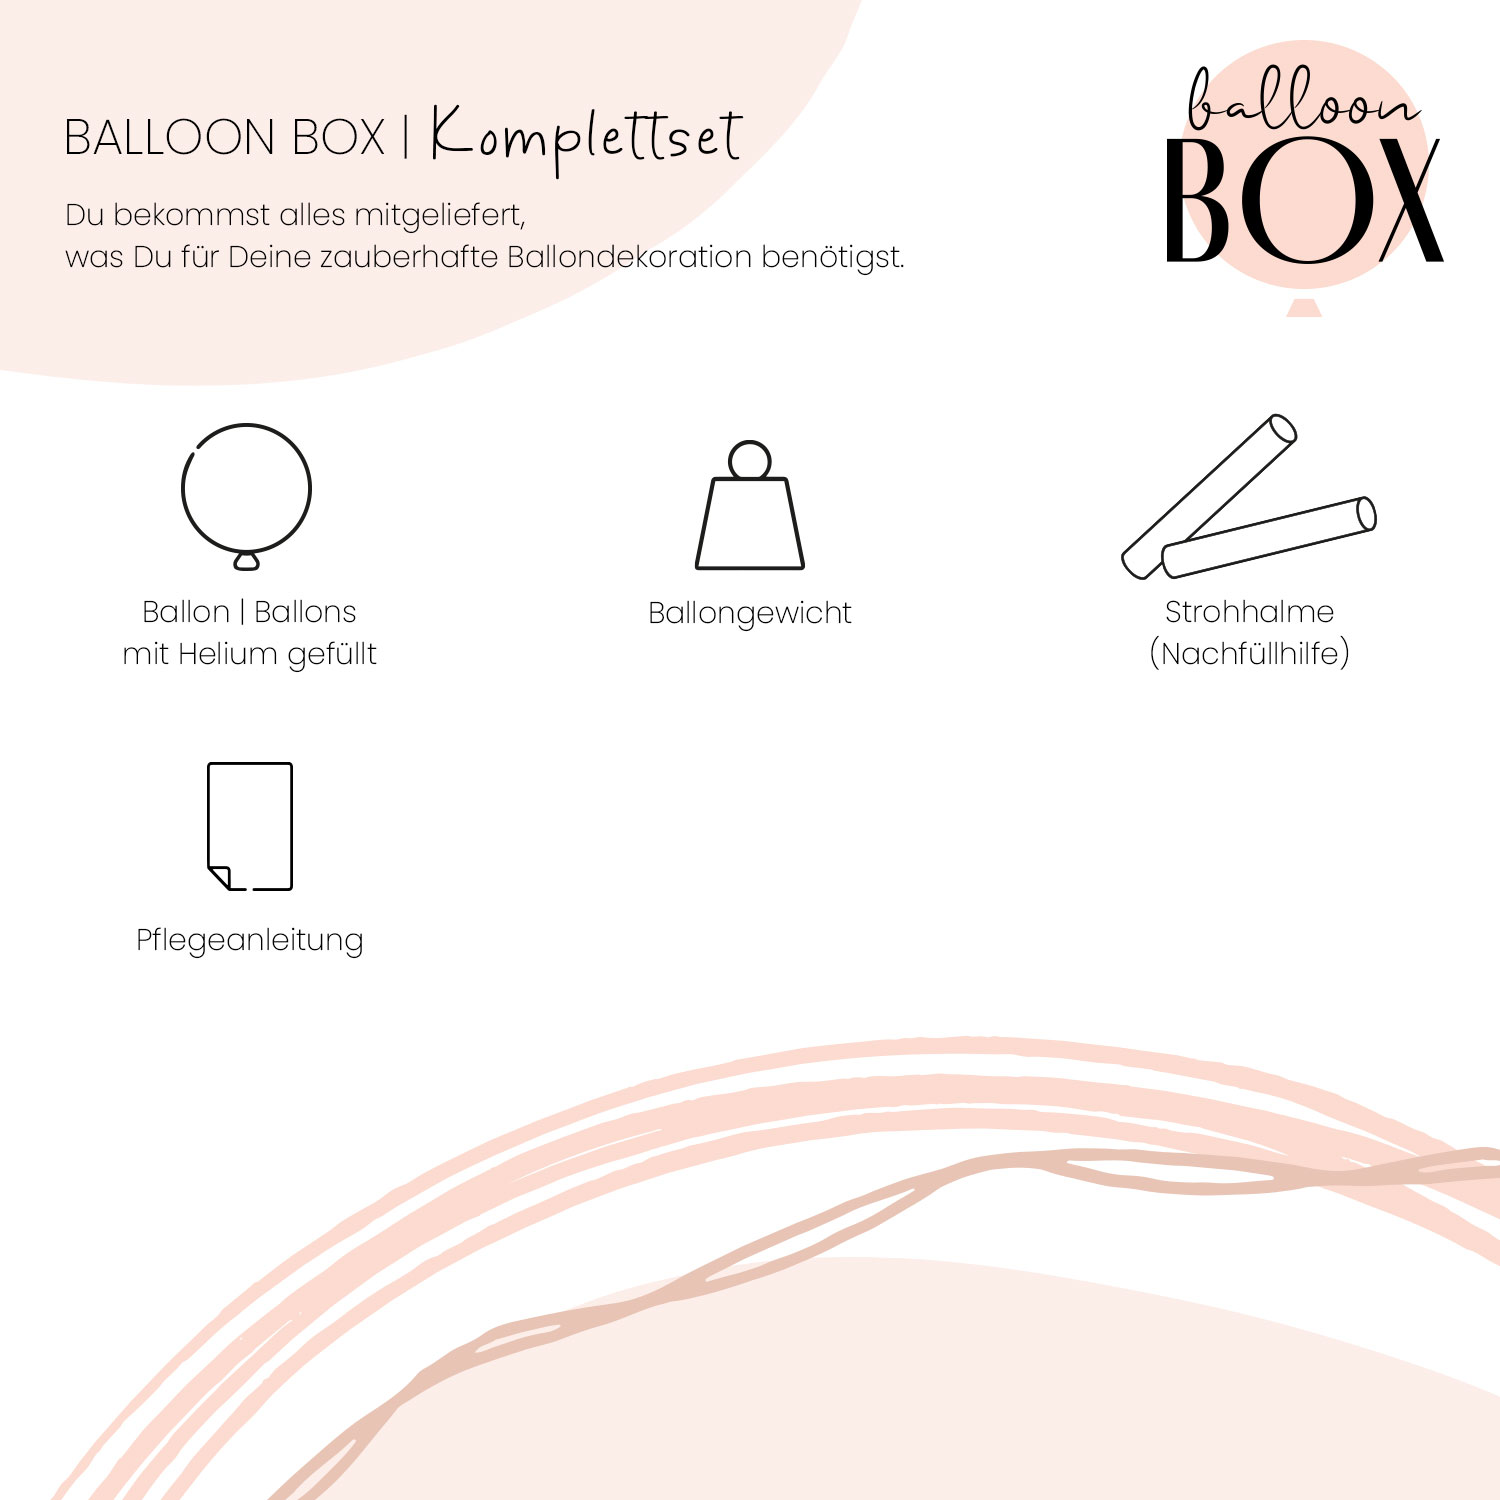 Heliumballon in a Box - Baby Buggy